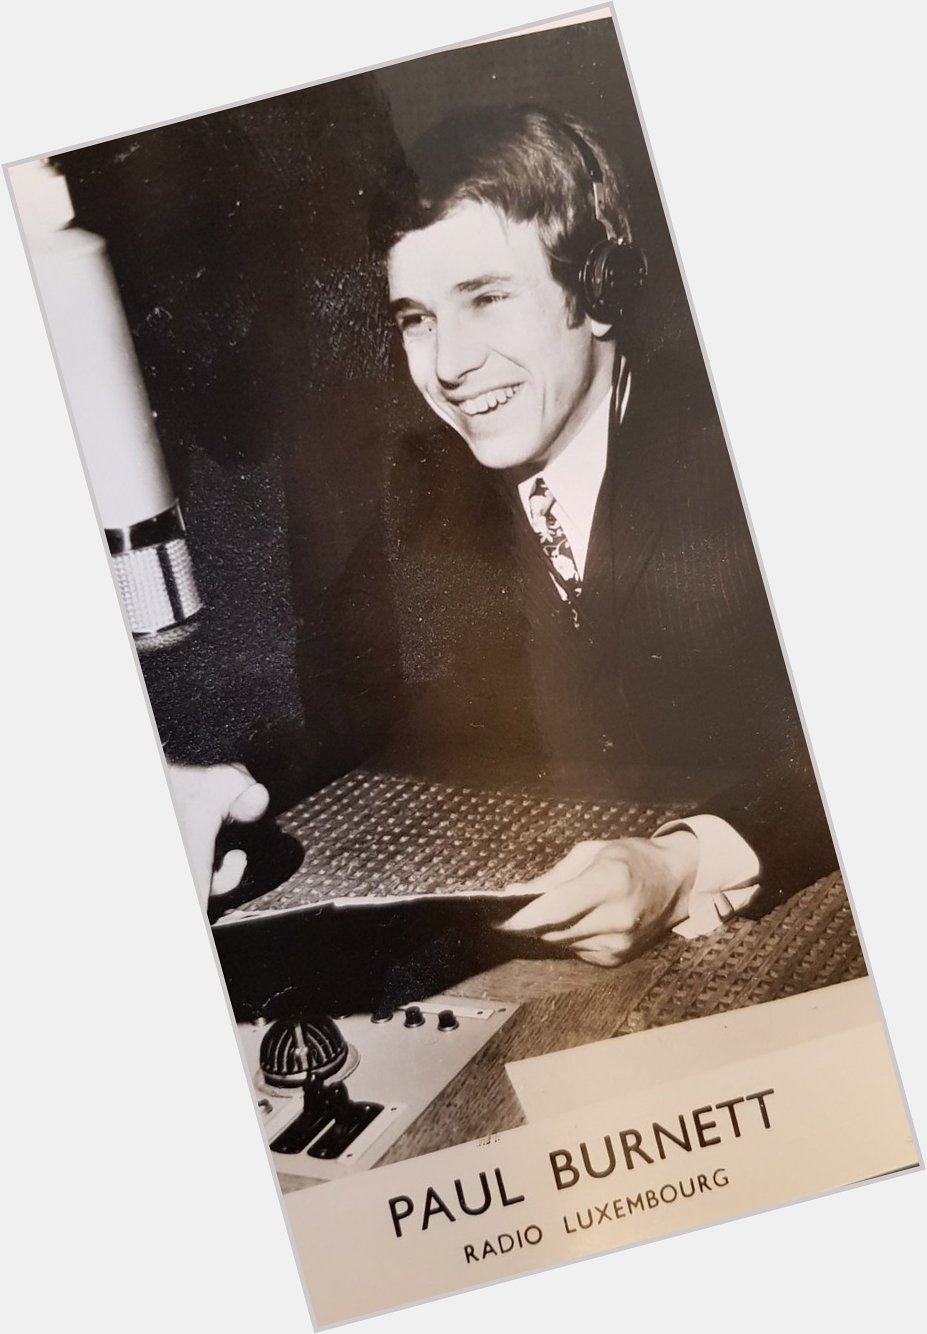 Happy birthday to one of the radio greats Paul Burnett who featured recently in our beat feature. 